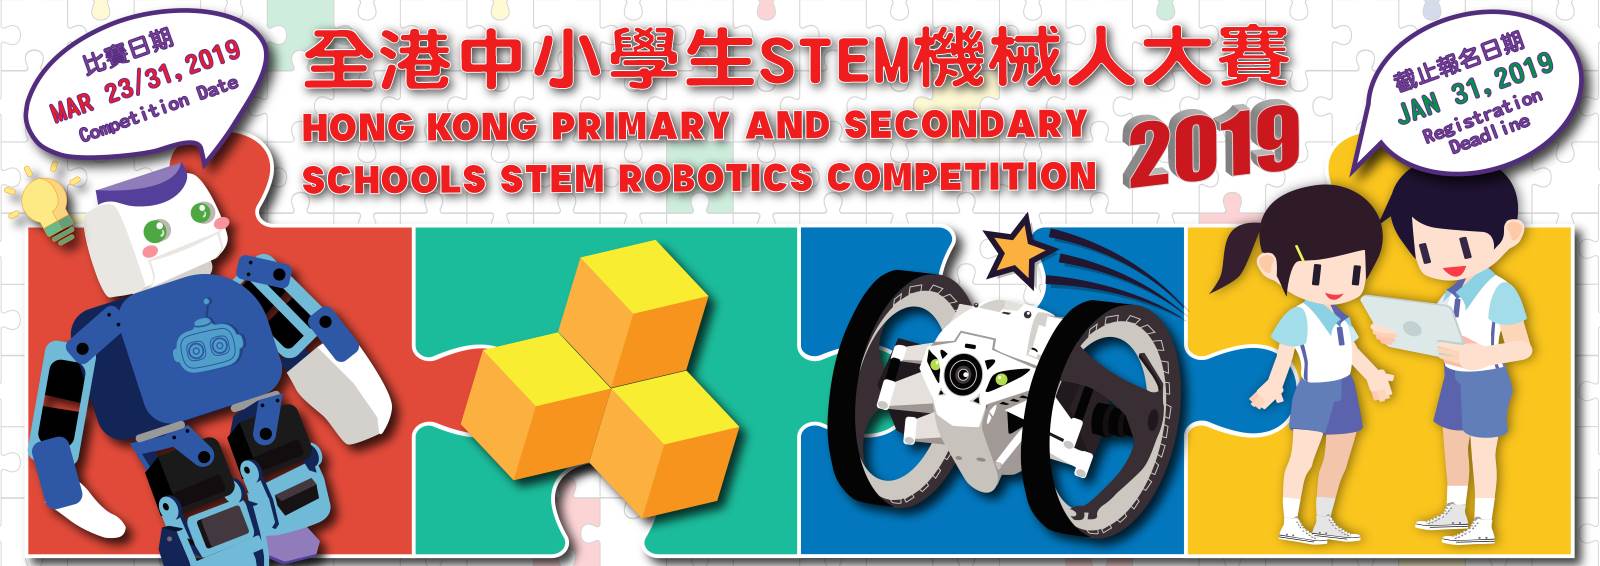 Hong Kong Primary & Secondary Schools<br/>STEM Robotics Competition 2019